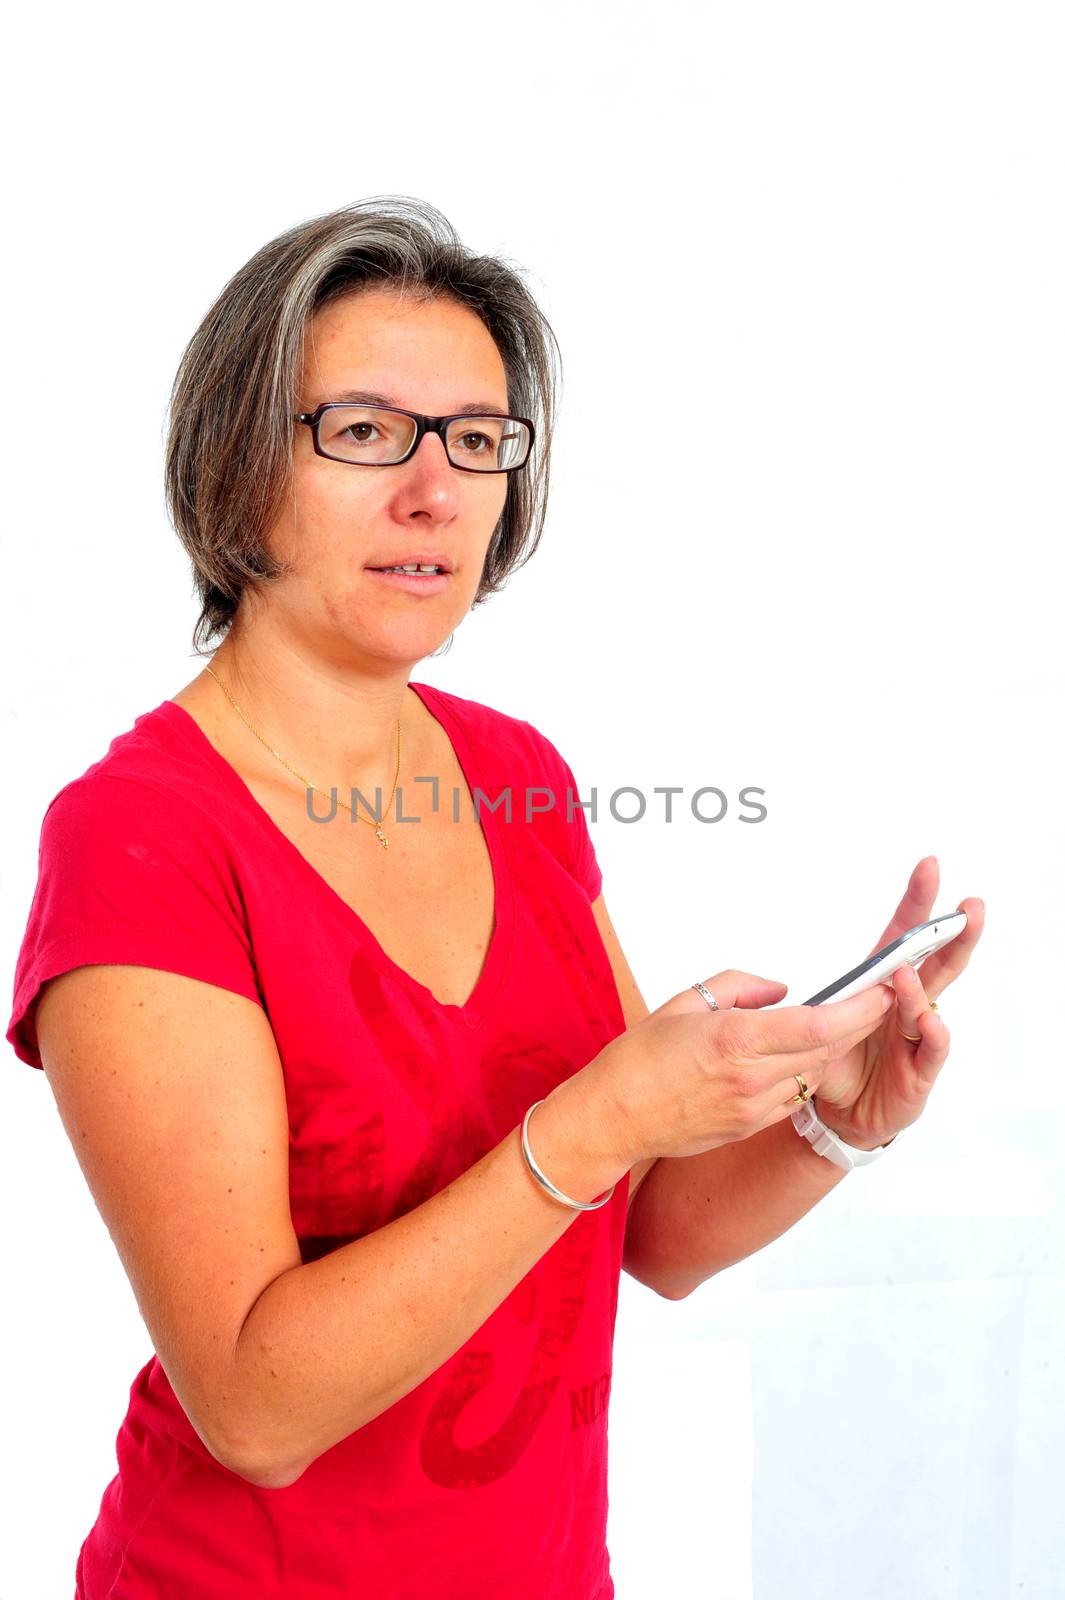 Woman in red t shirt on smartphone in studio by seawaters